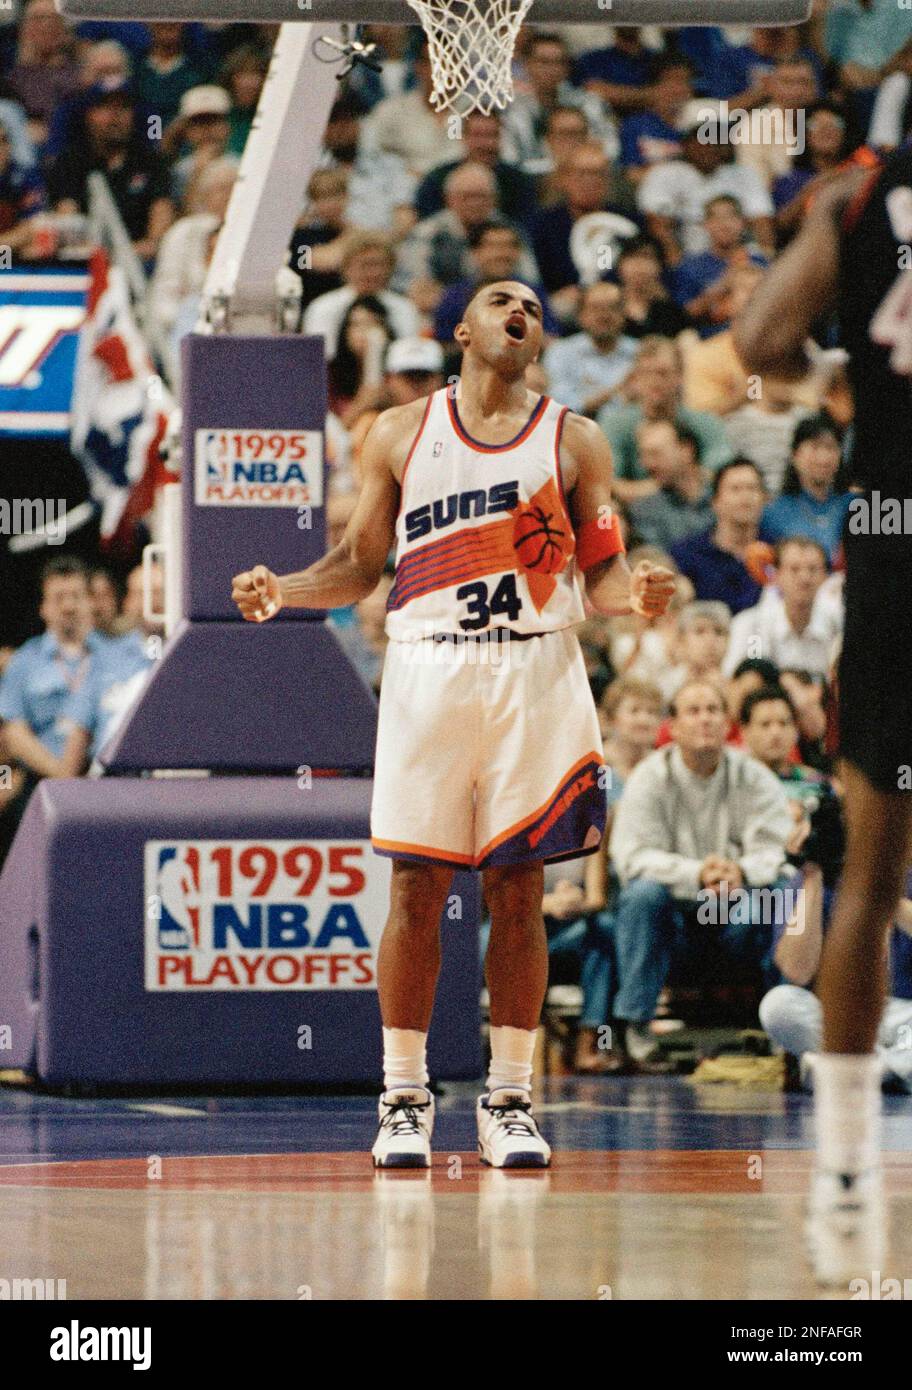 Phoenix Suns forward Charles Barkley lets out a yell as the Suns defeat the Portland Trail Blazers 103-94 at Phoenix, April 30, 1995. The Suns lead the best-of-five series 2-0. (AP Photo/Eric Drotter) Stock Photo